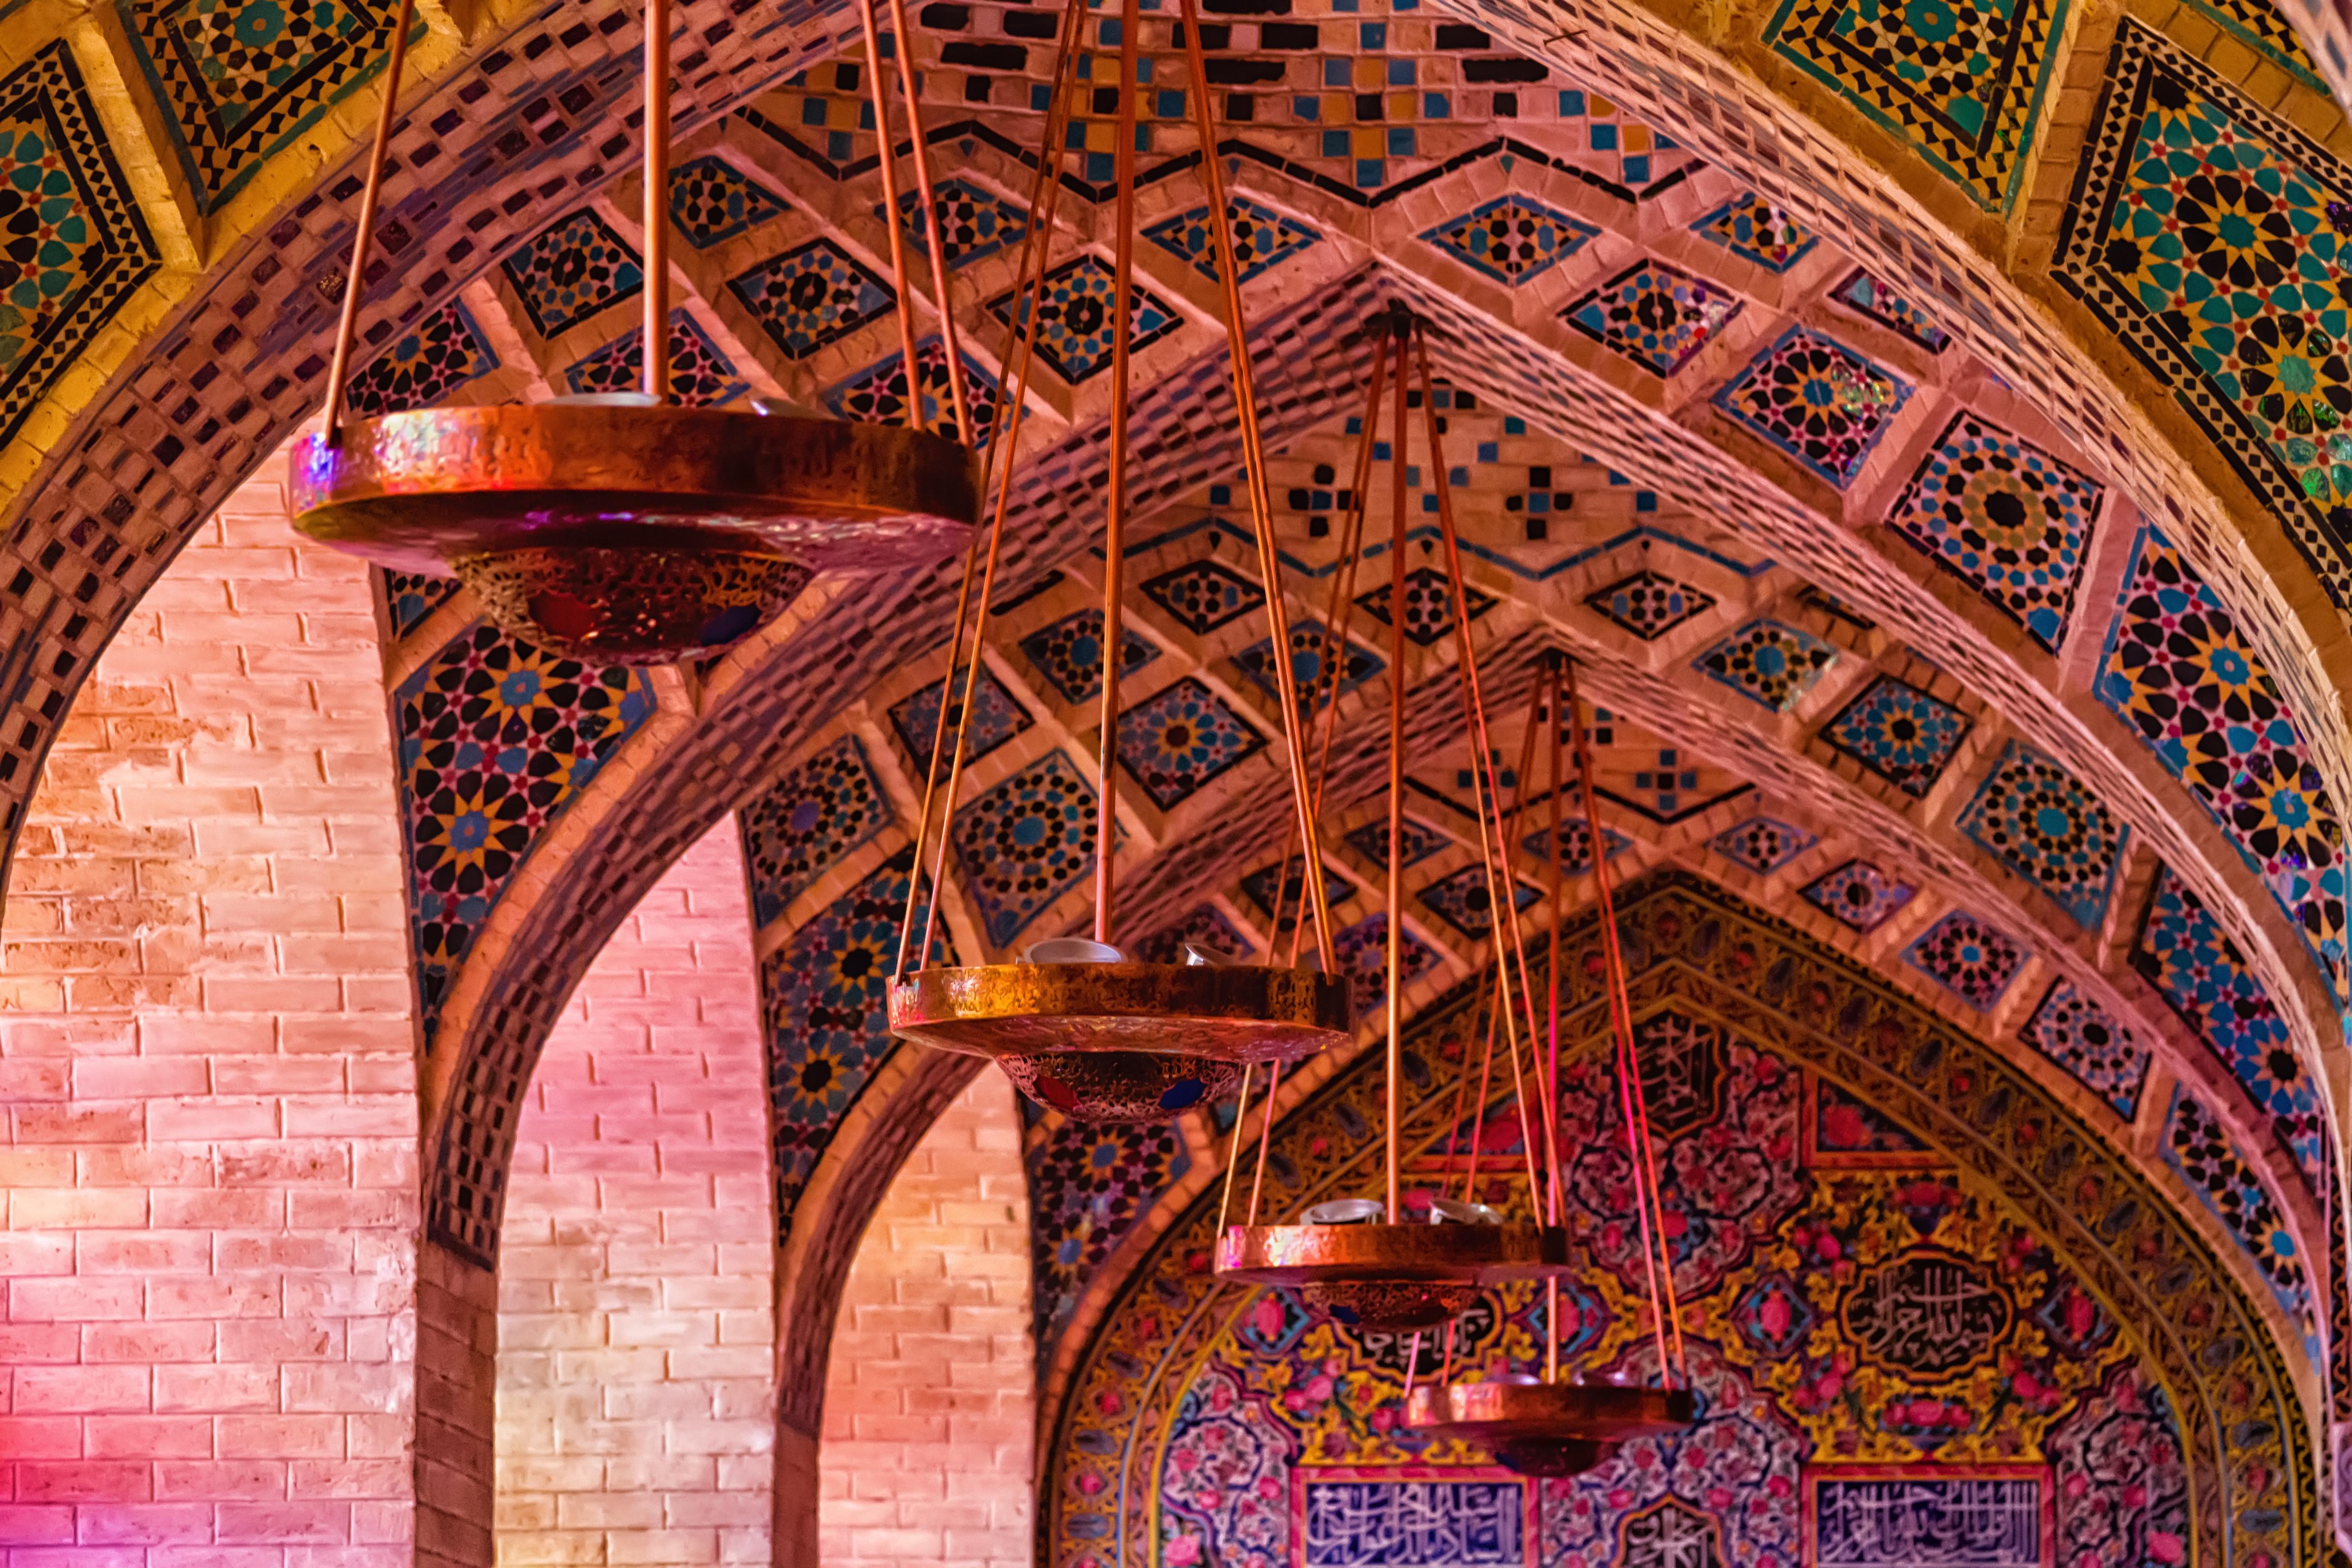 Interior of the pink mosque